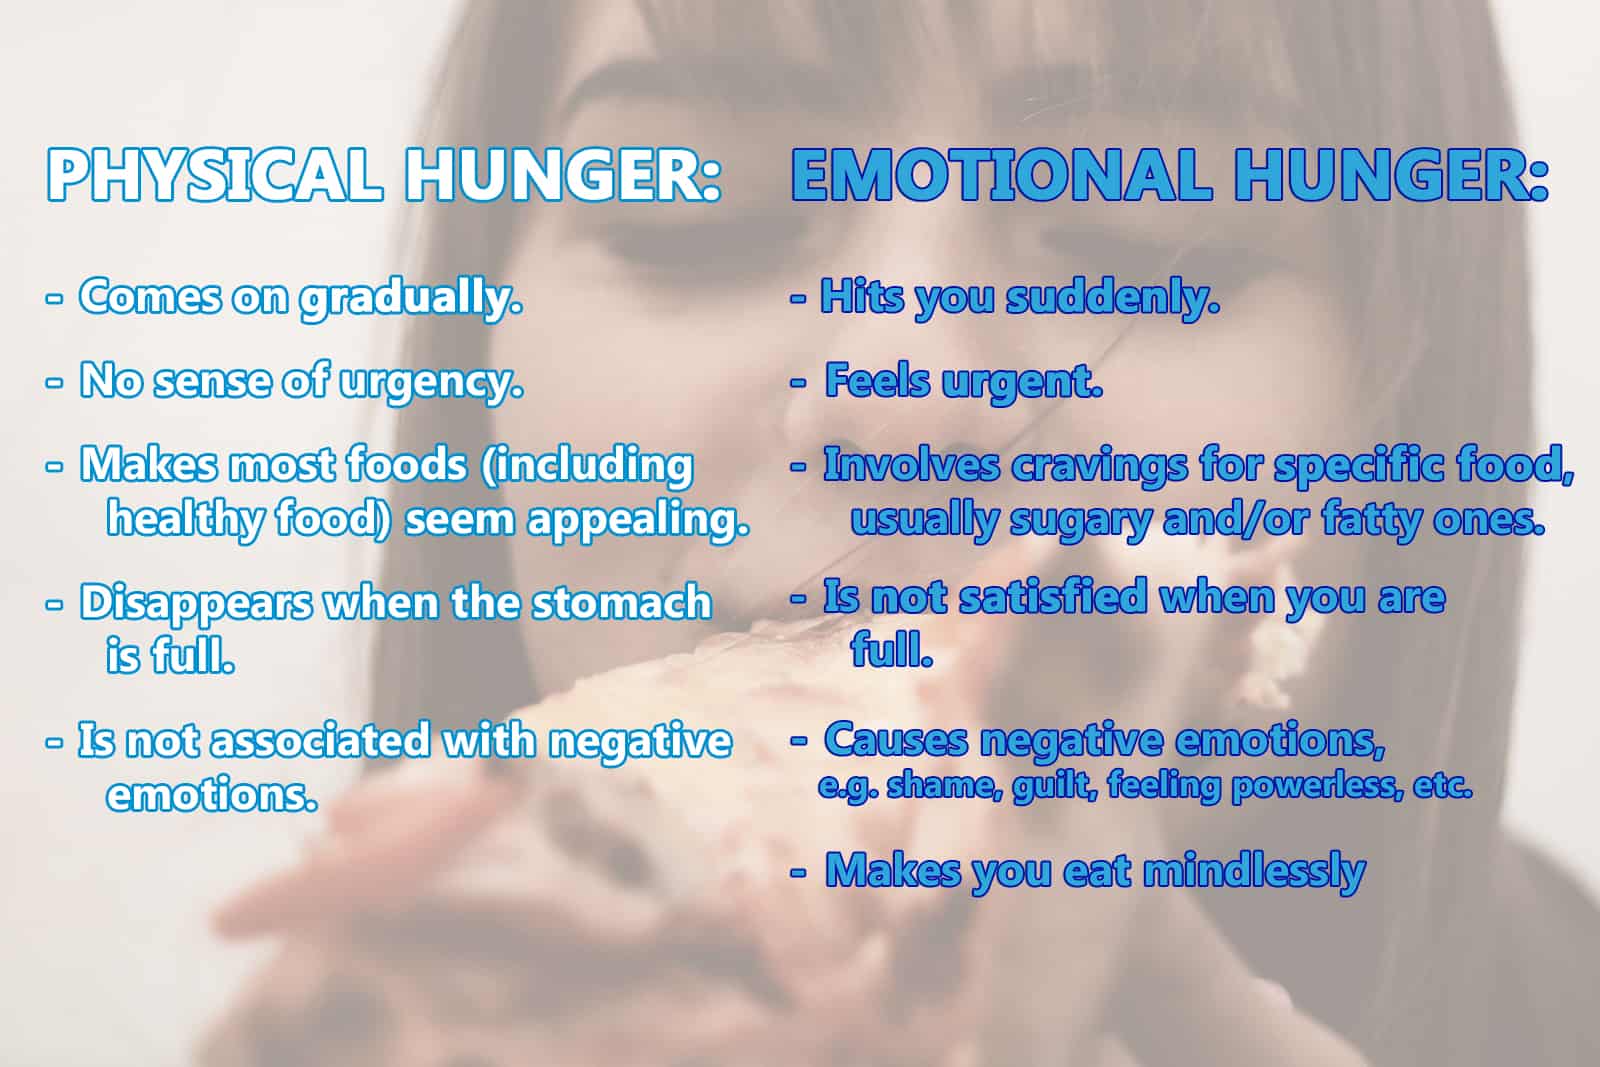 Differences between physical hunger and emotional hunger.